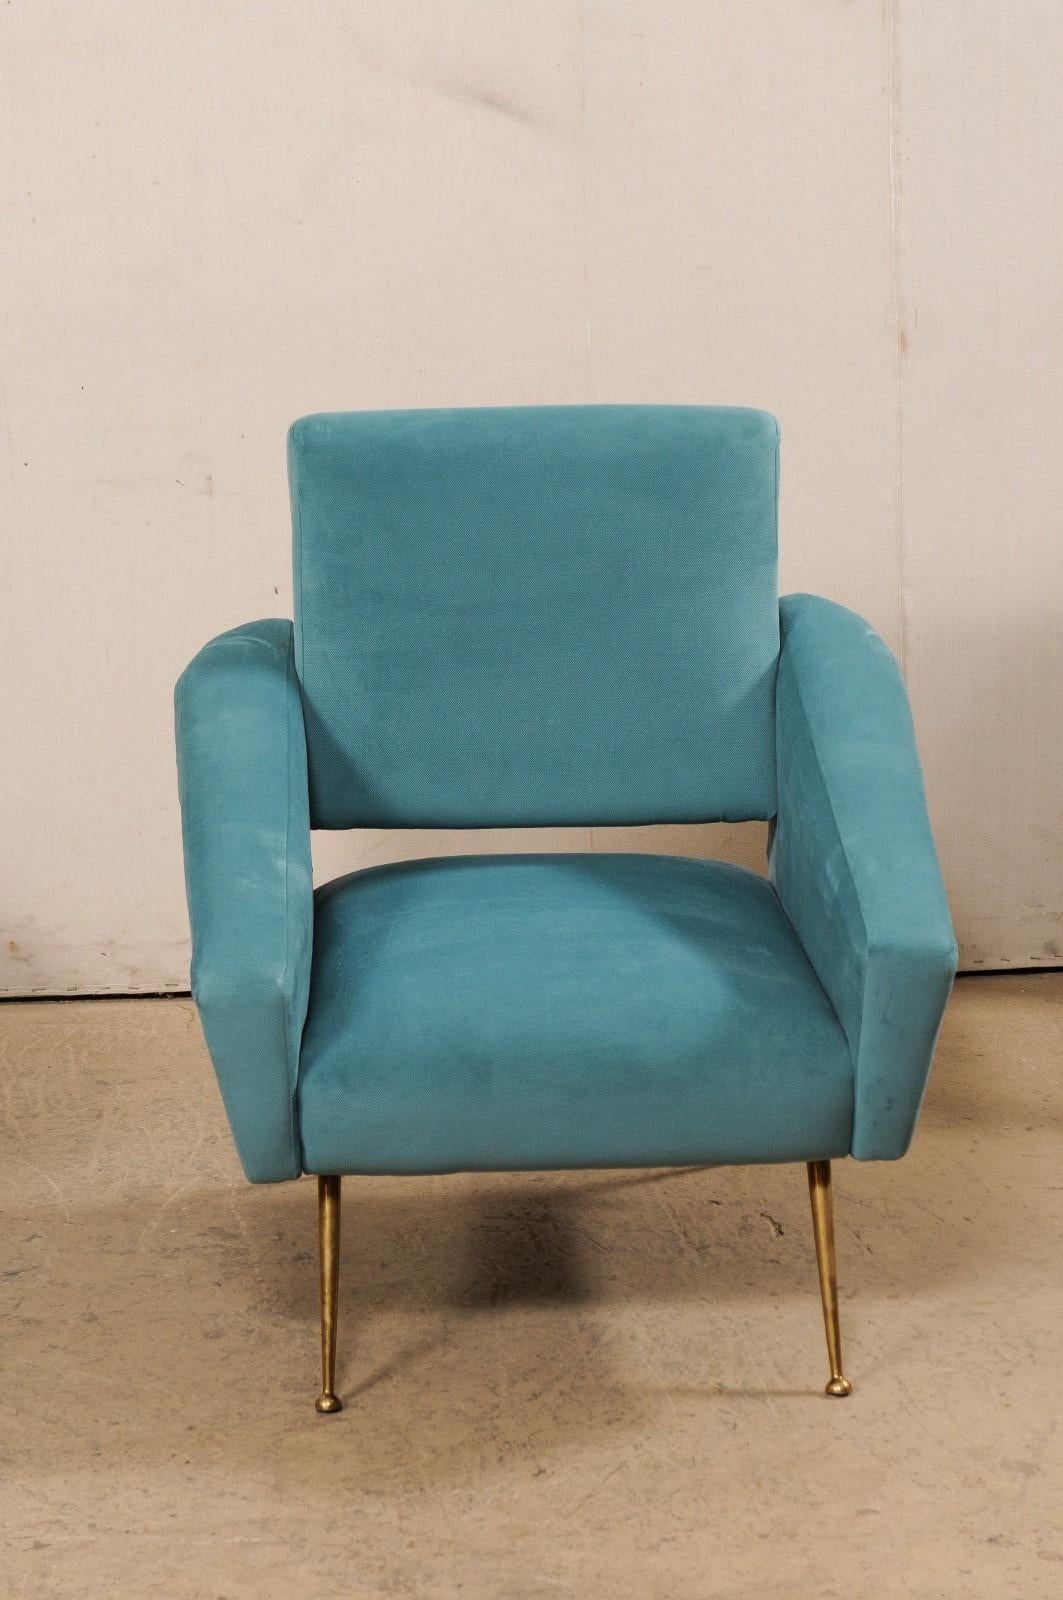 Italian Pair of Mid-Century Modern Upholstered Club Chairs In Good Condition For Sale In Atlanta, GA